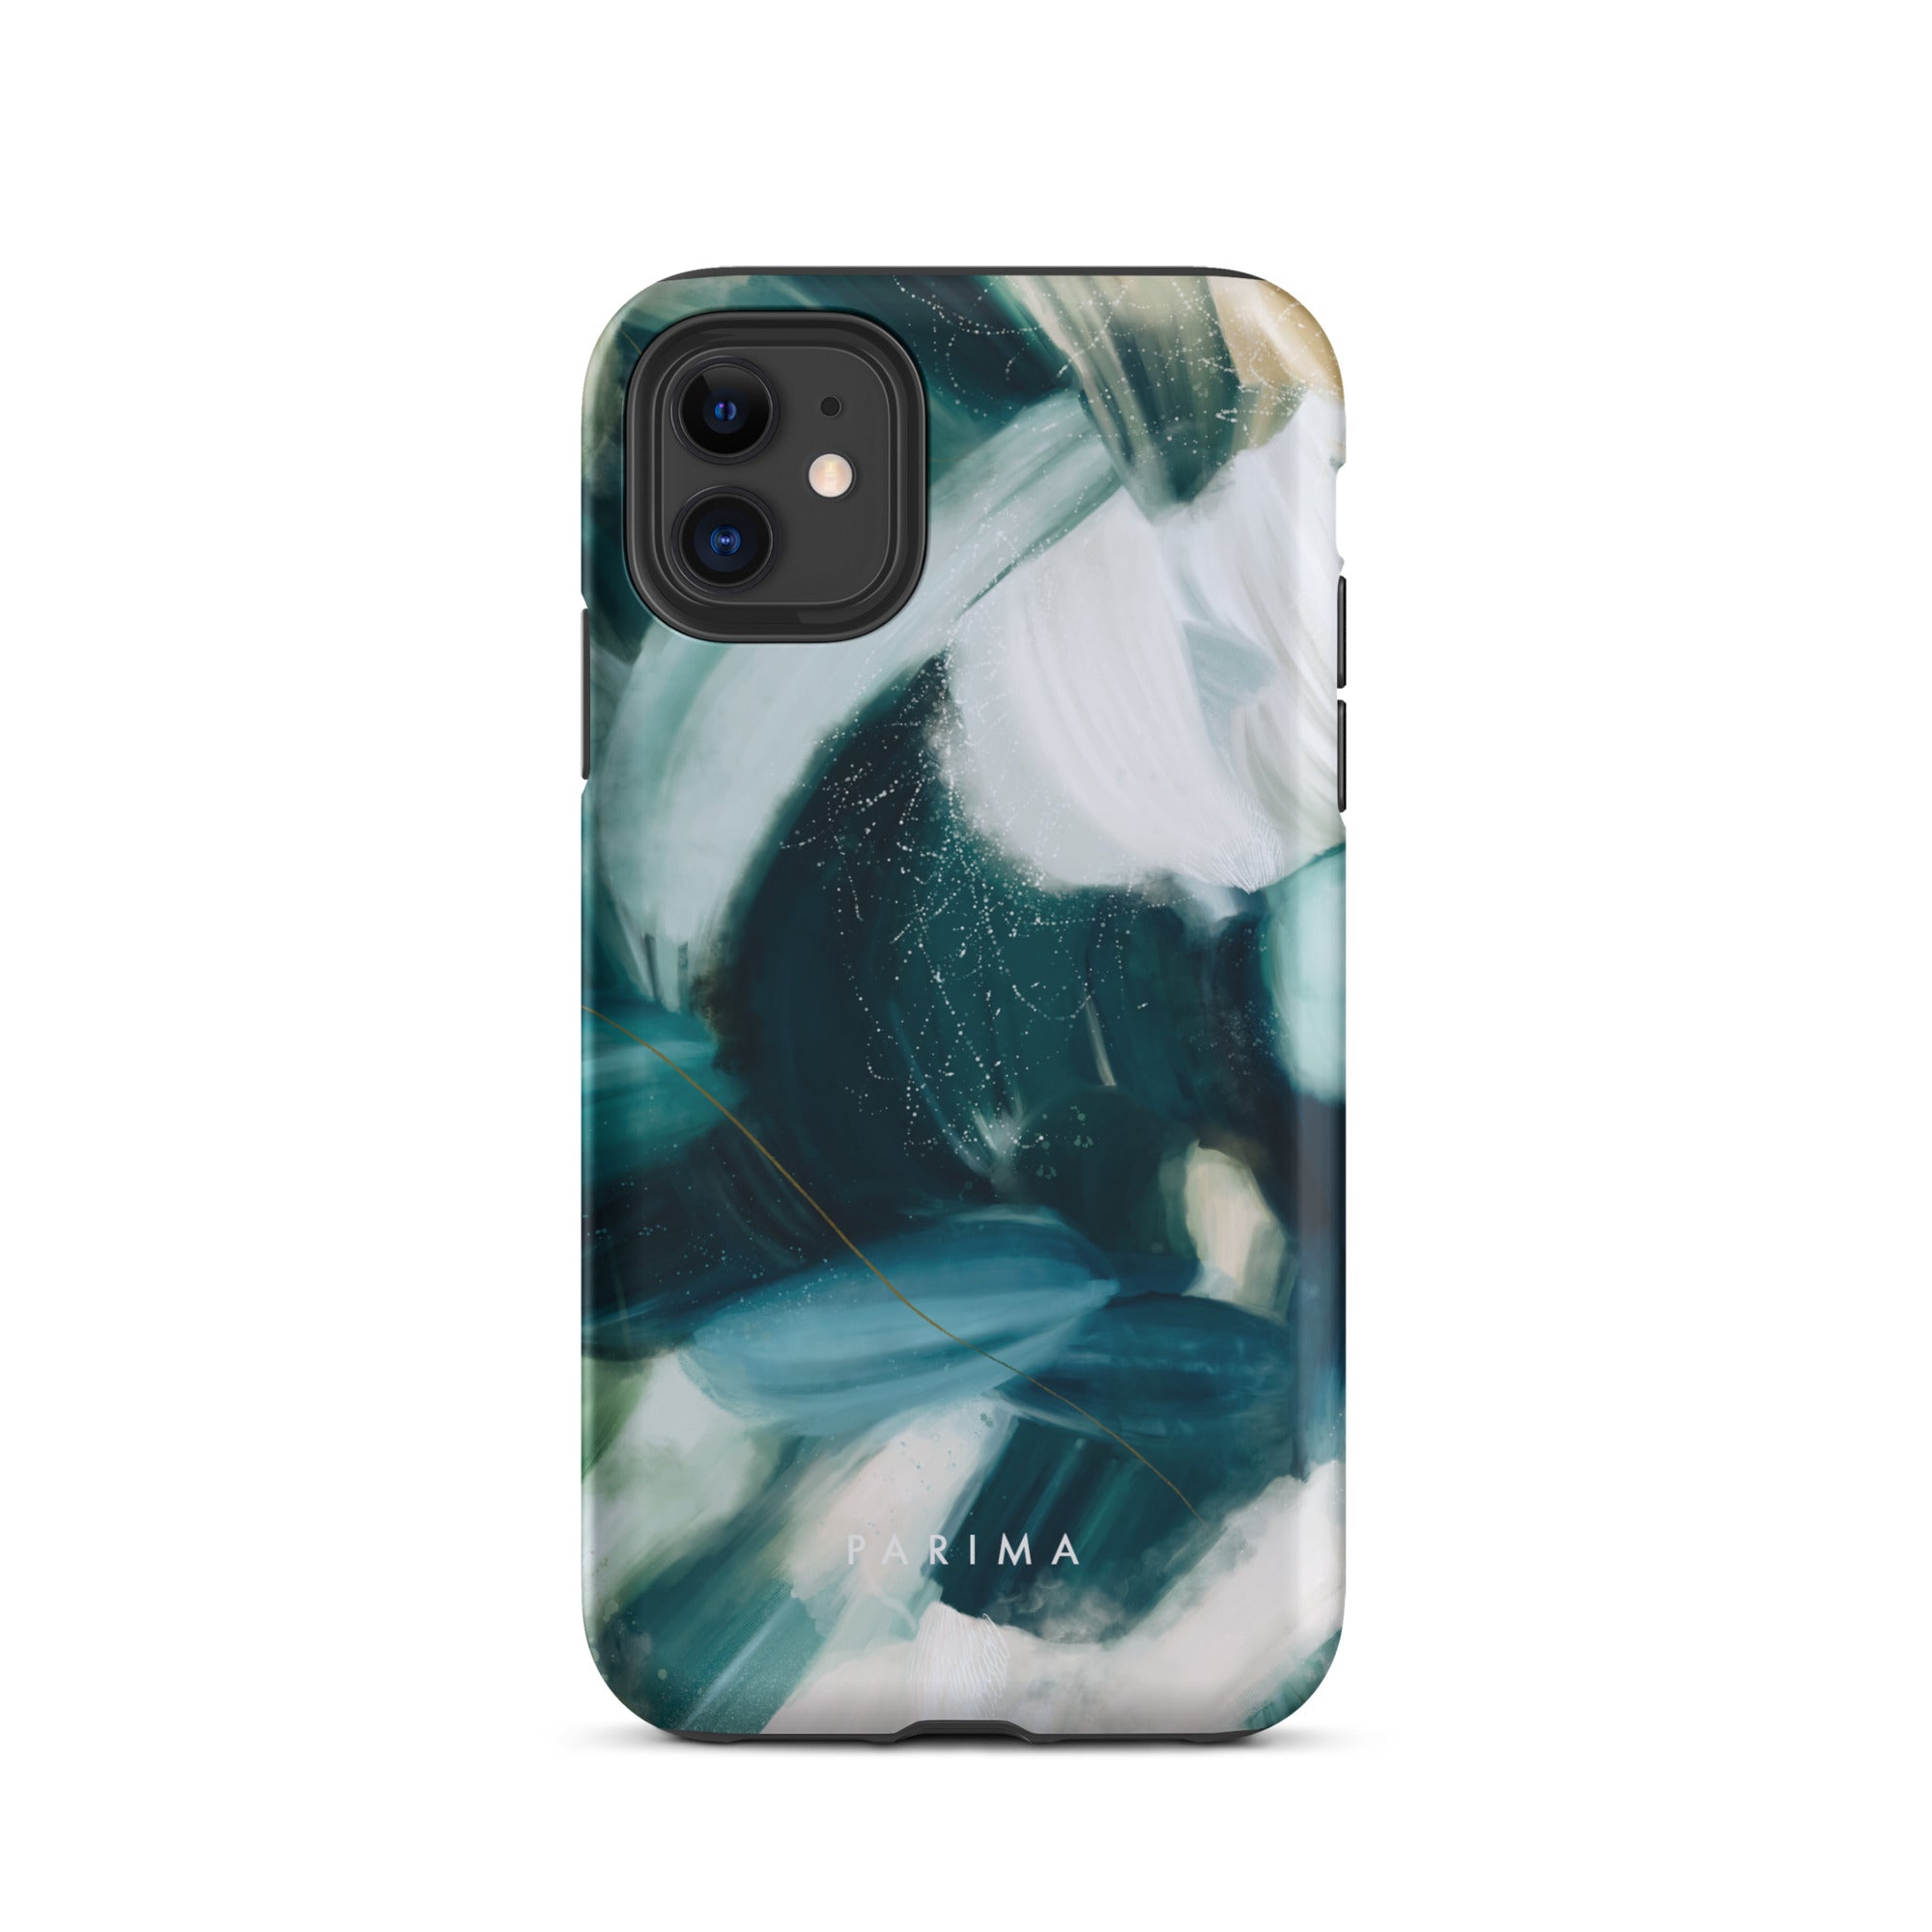 Caspian, green and blue abstract art - iPhone 11 tough case by Parima Studio